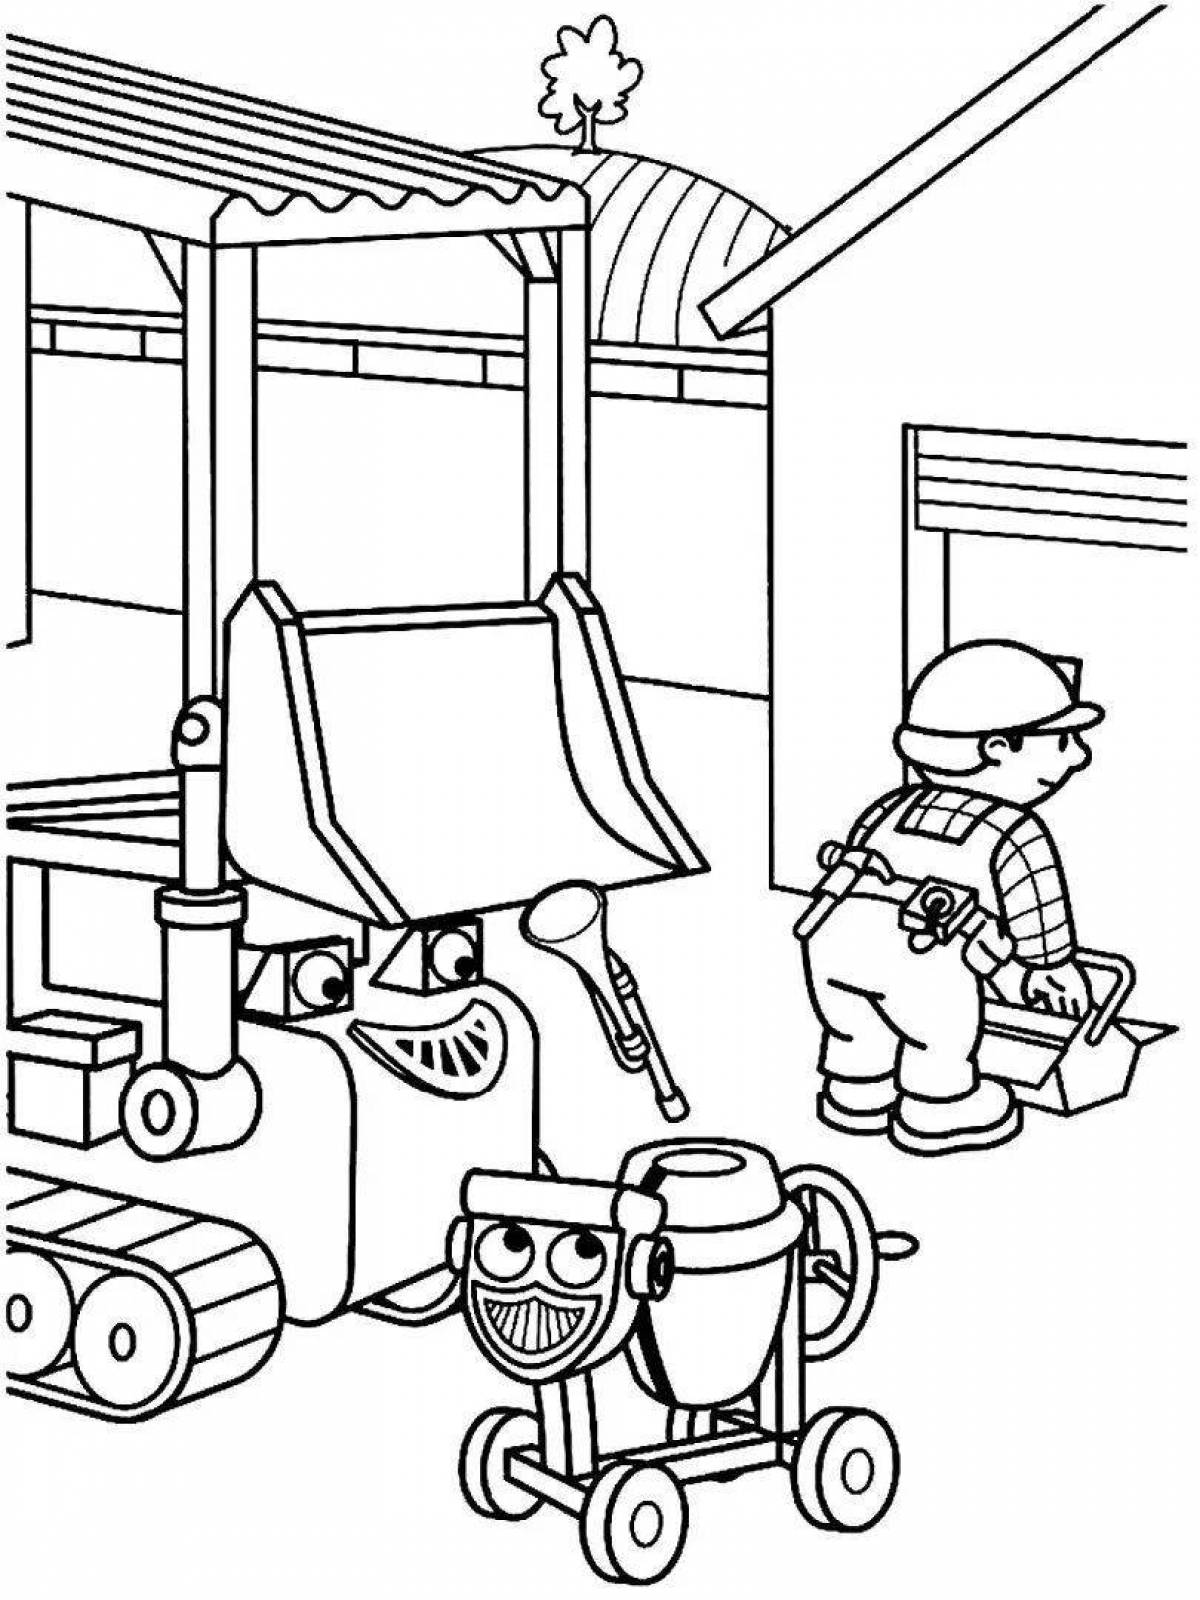 Coloring page of complex house design